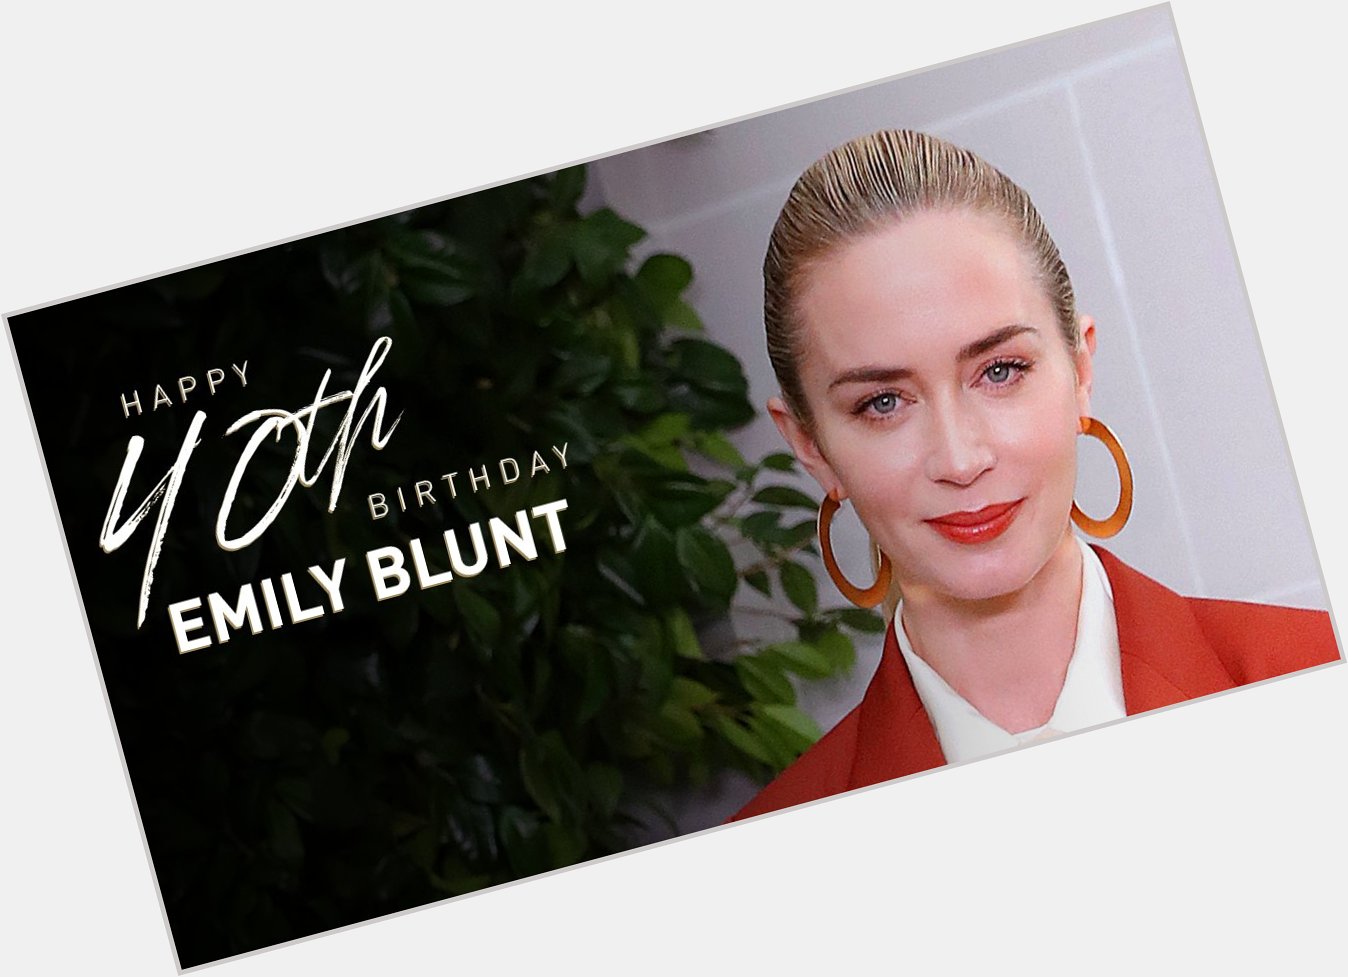 Happy 40th birthday Emily Blunt!

Read the tribute here:  